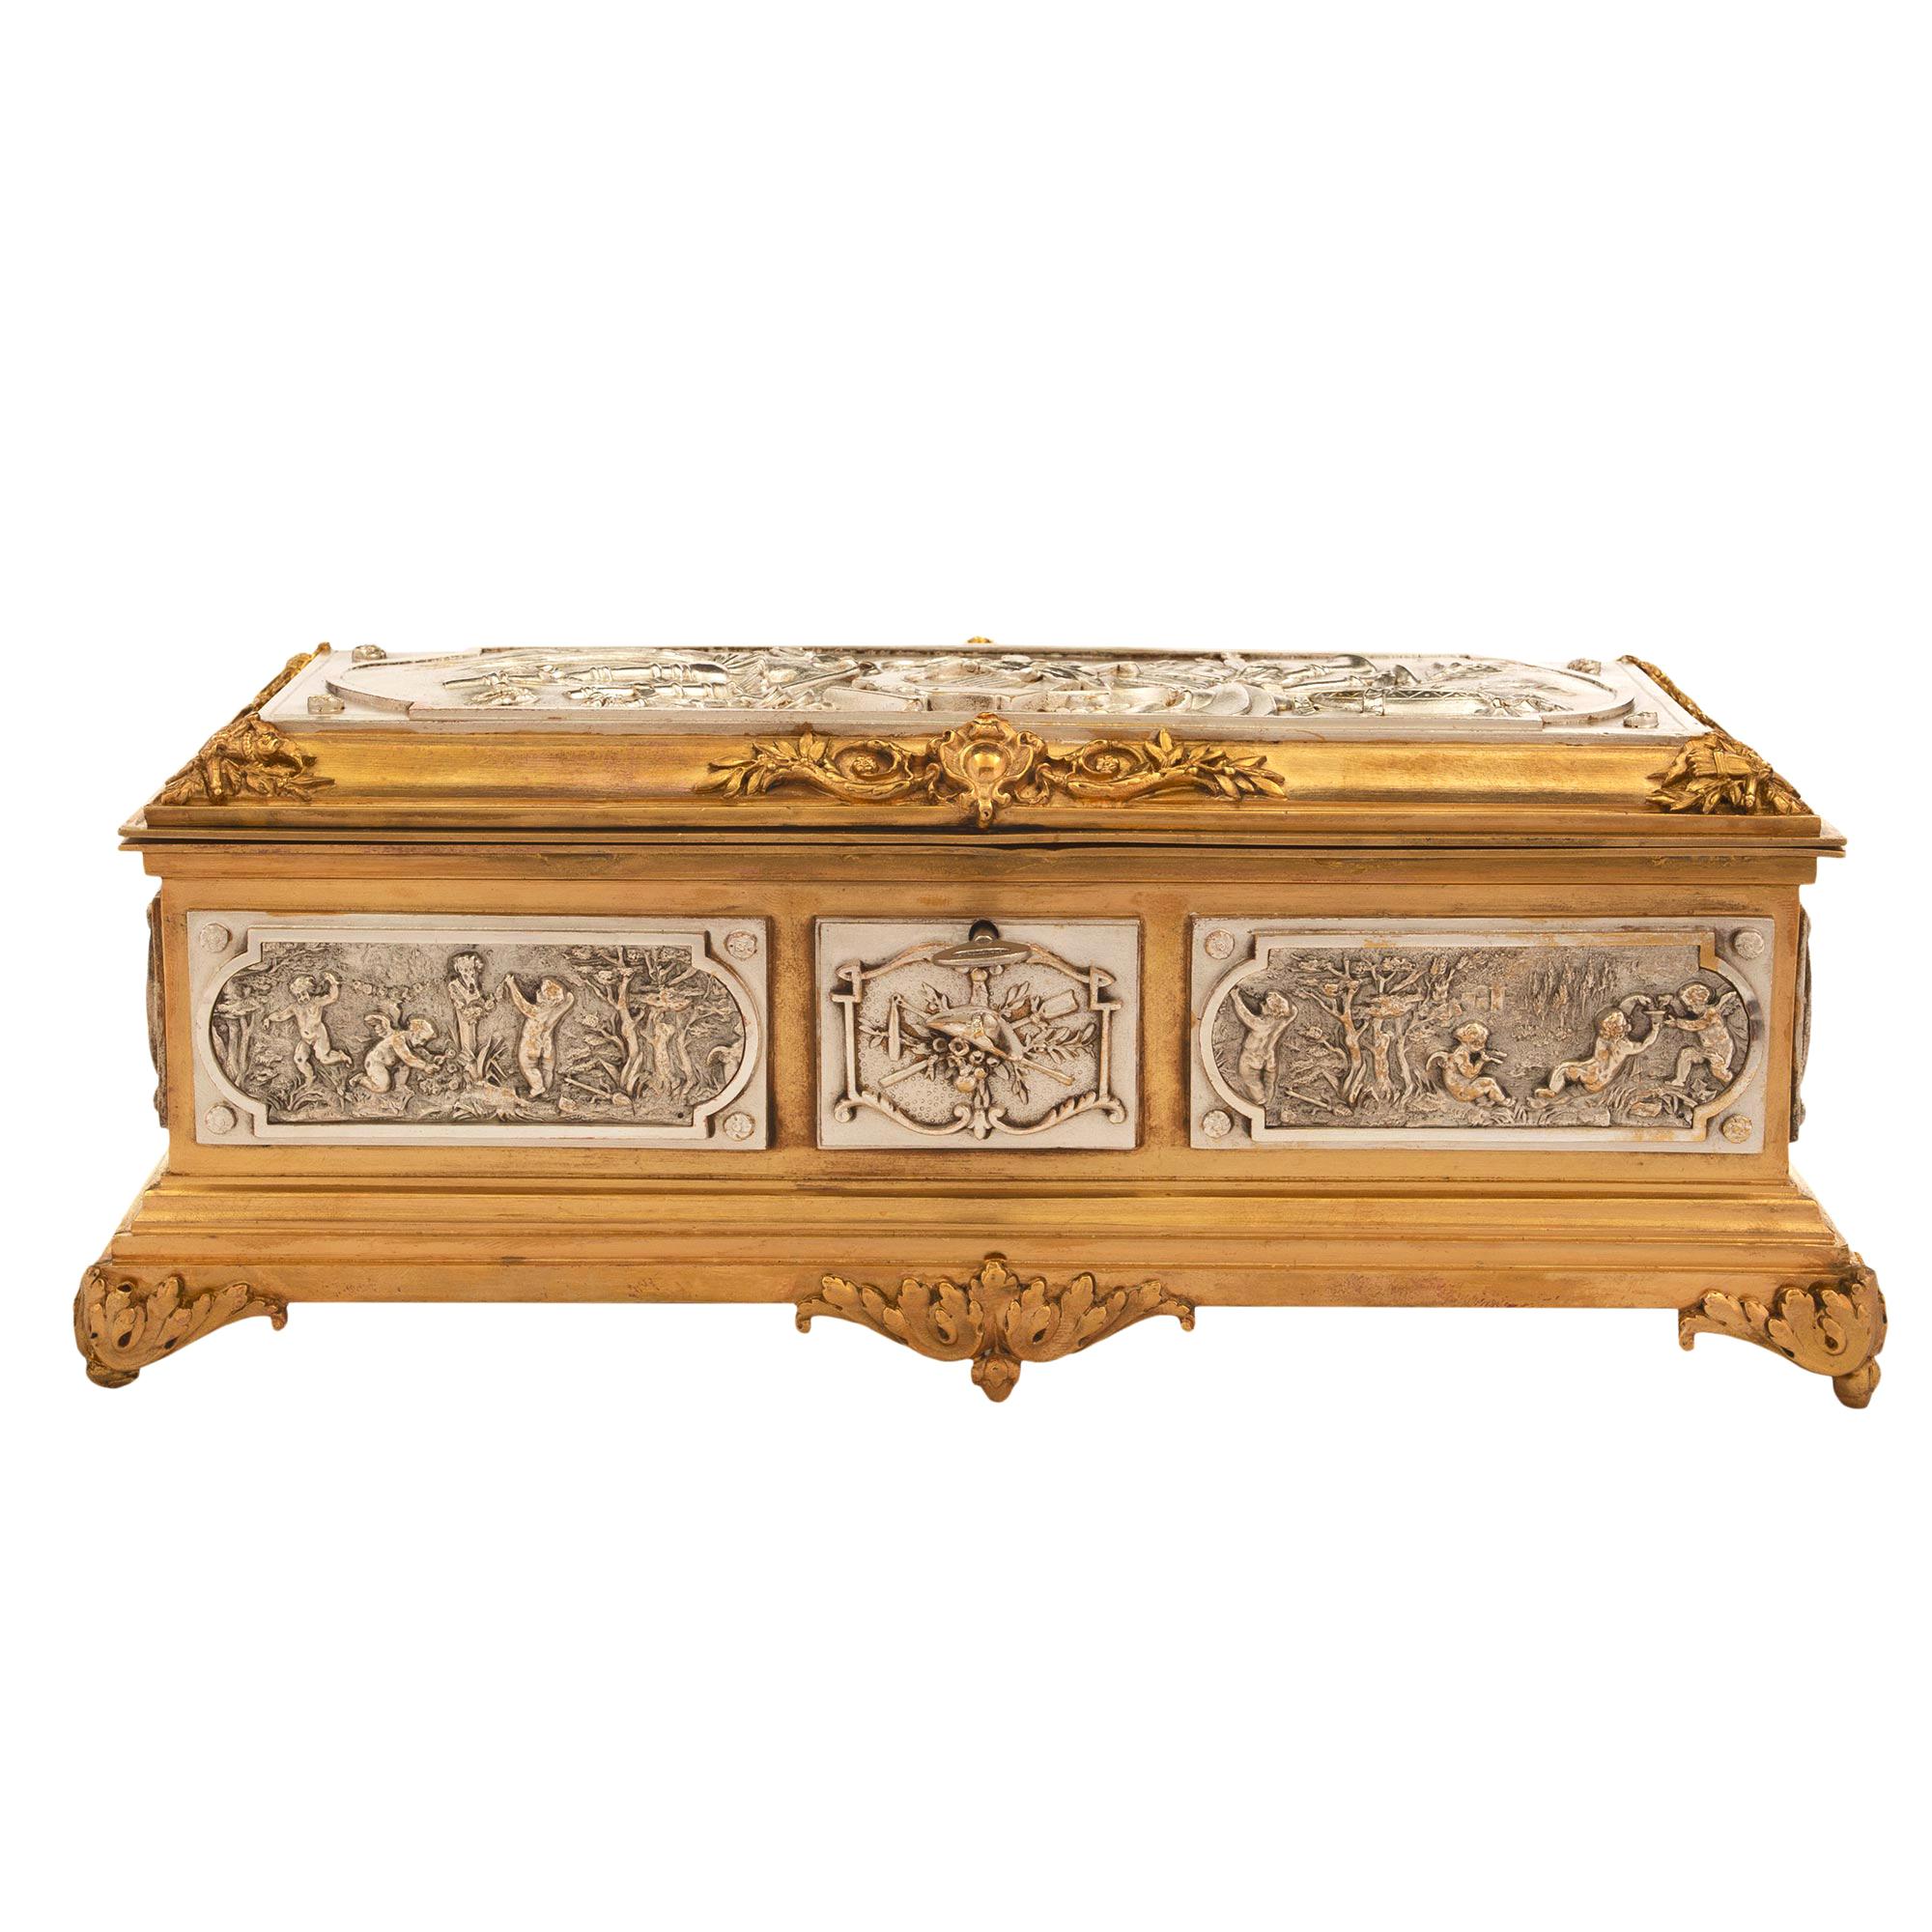 French Mid-19th Century Louis XVI Style Jewelry Box in Ormolu & Silvered Bronze